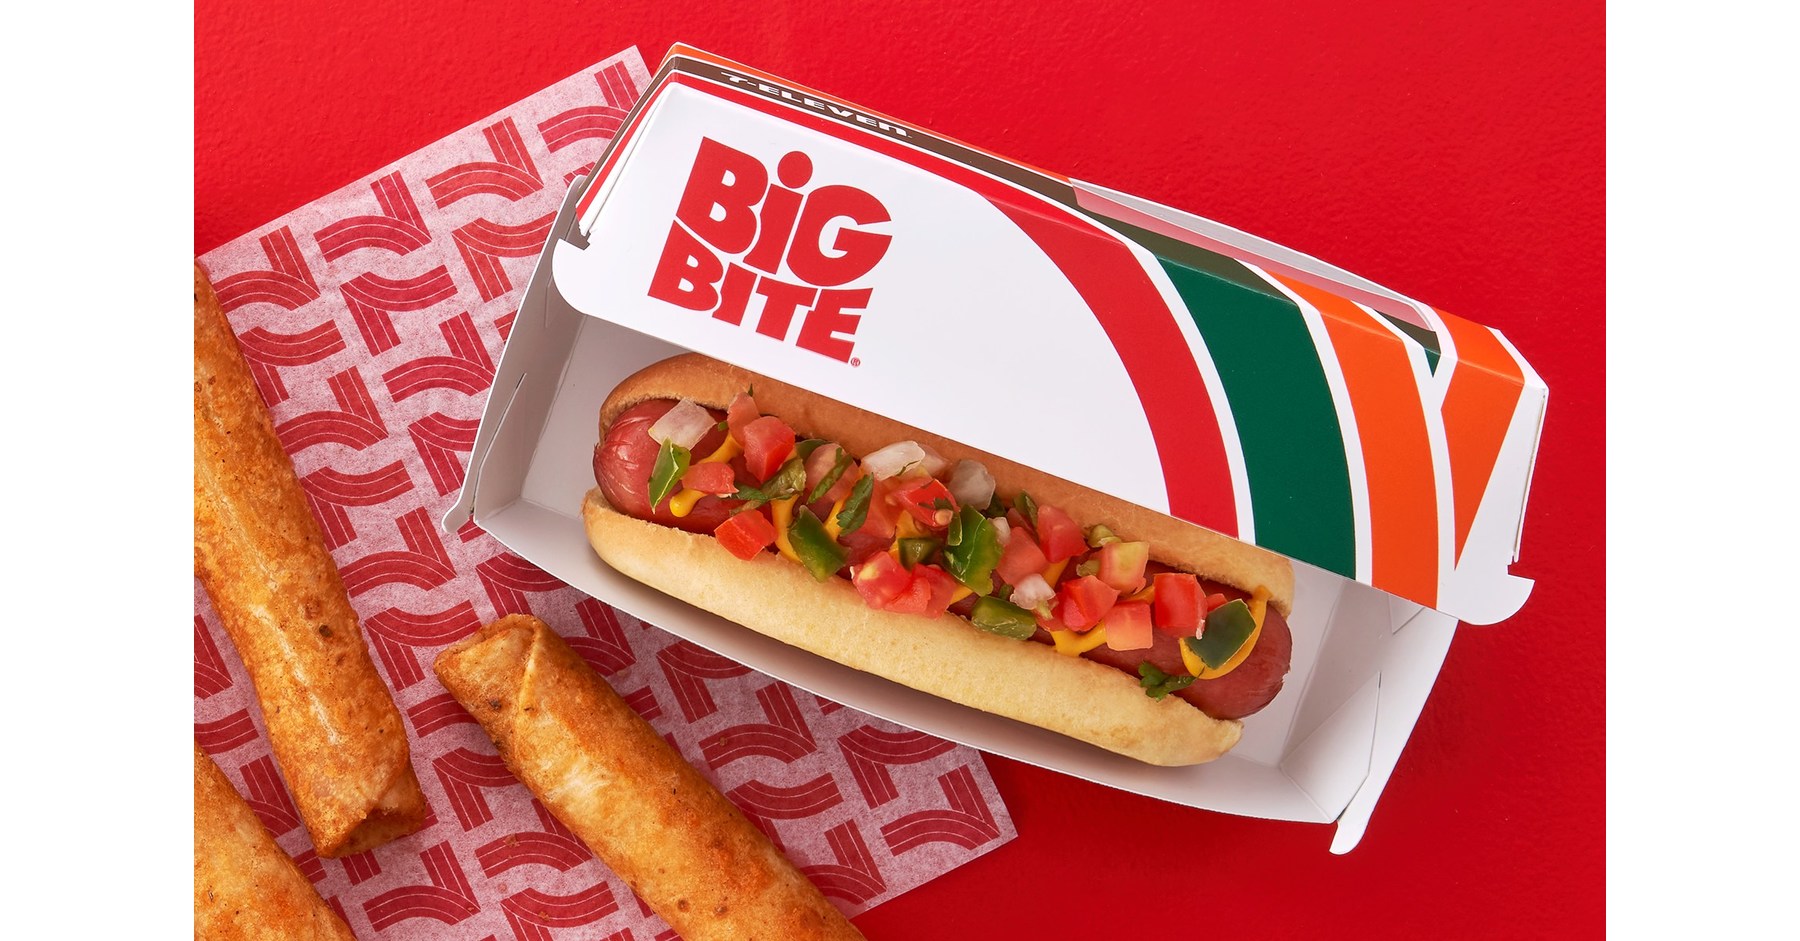 I used to work at 7-11, so i’m gonna say any of the taquitos or hotdogs around midnight, up through about 4 or 5AM. around midnight you can be almost assured that these are now high-mileage. That hotdog might have more miles than your car.